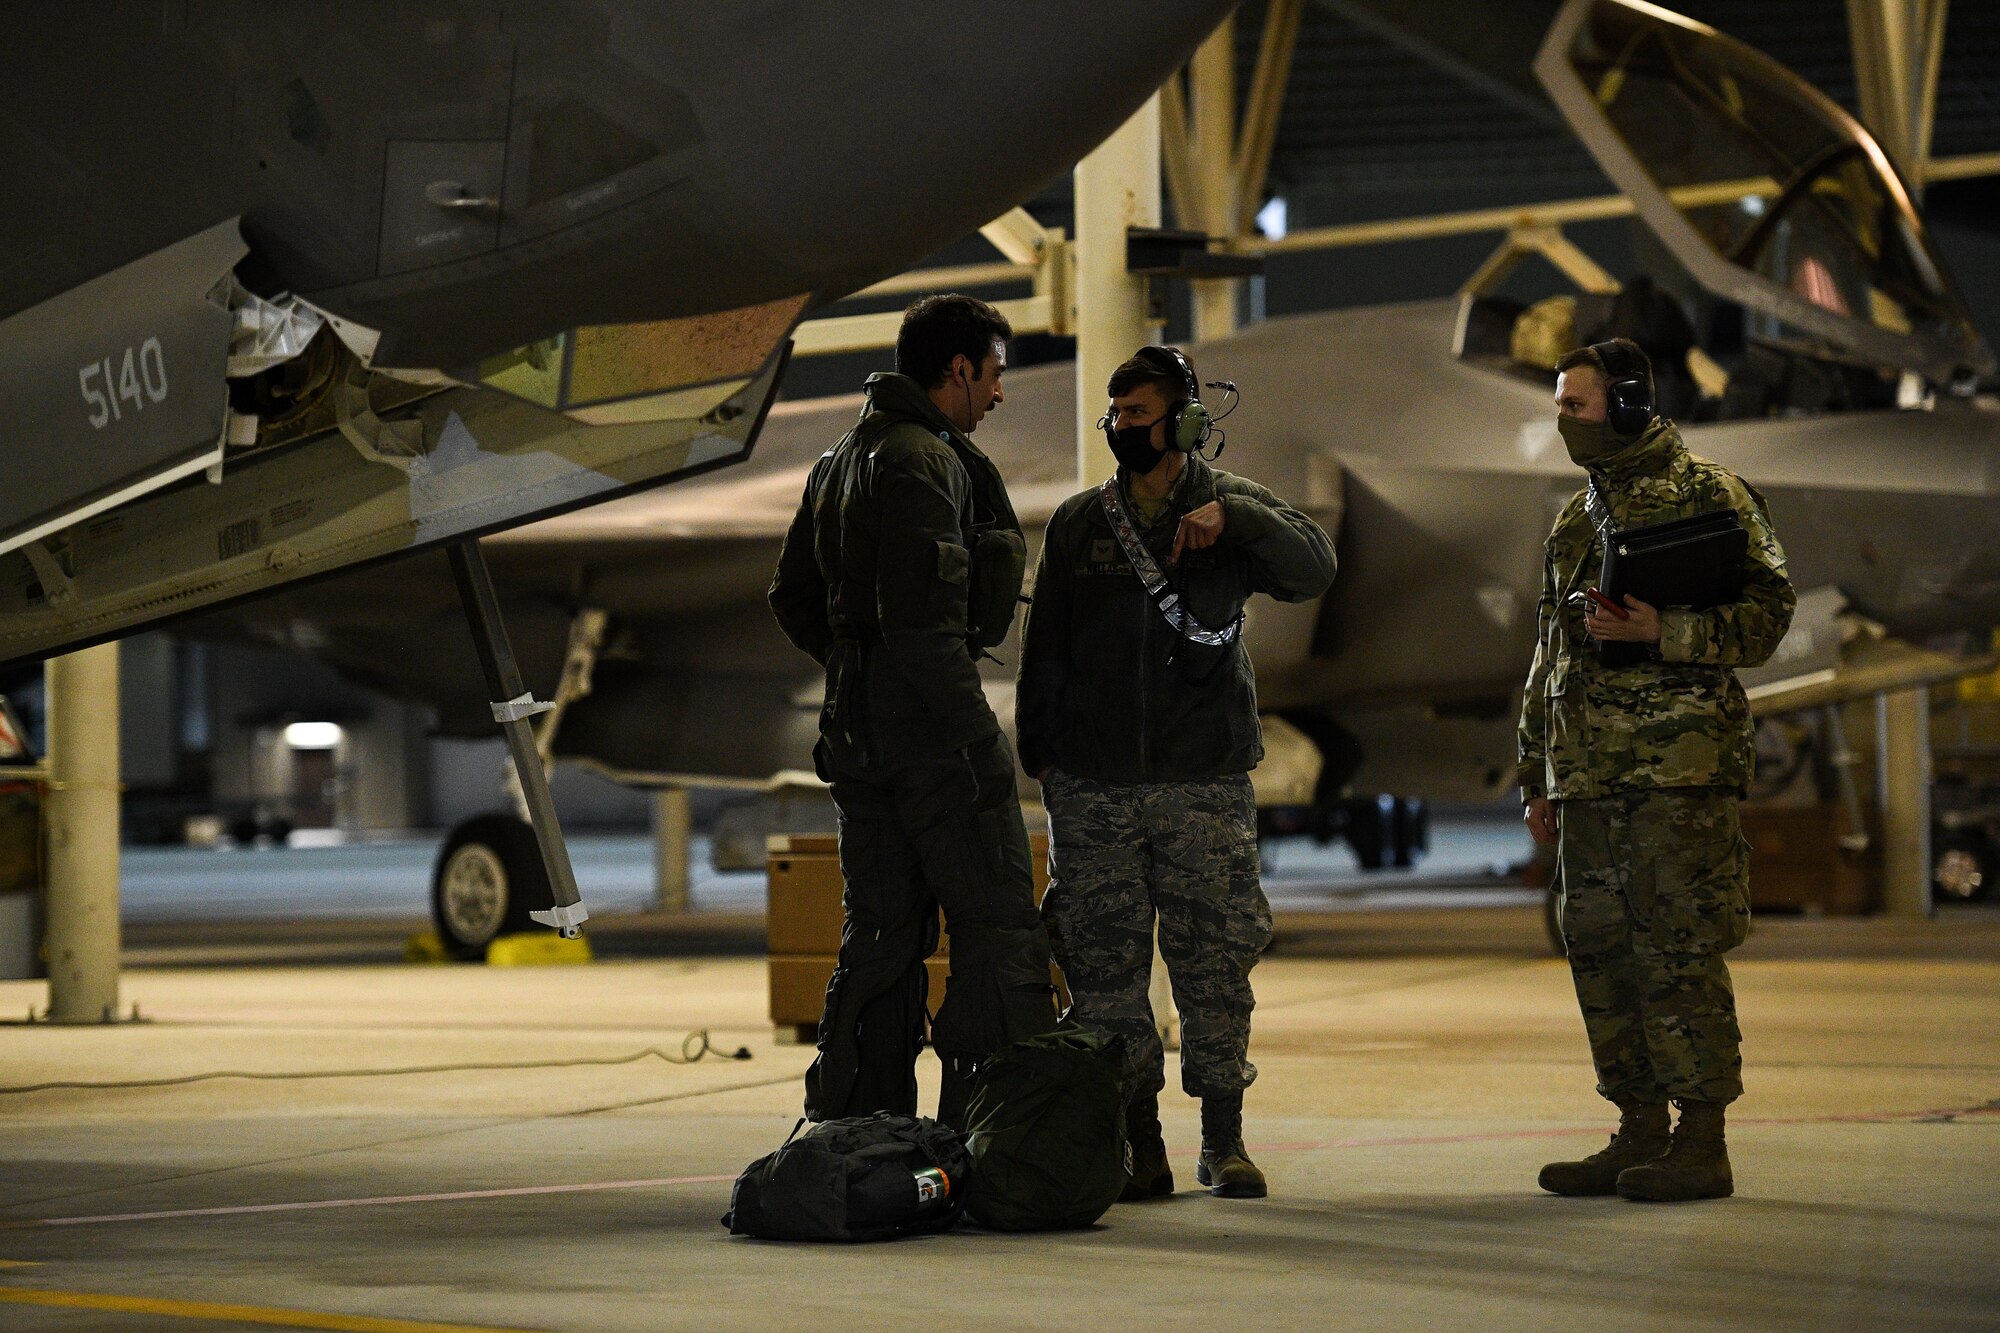 A photo of the 421st Fighter Squadron deployment to the Middle East.